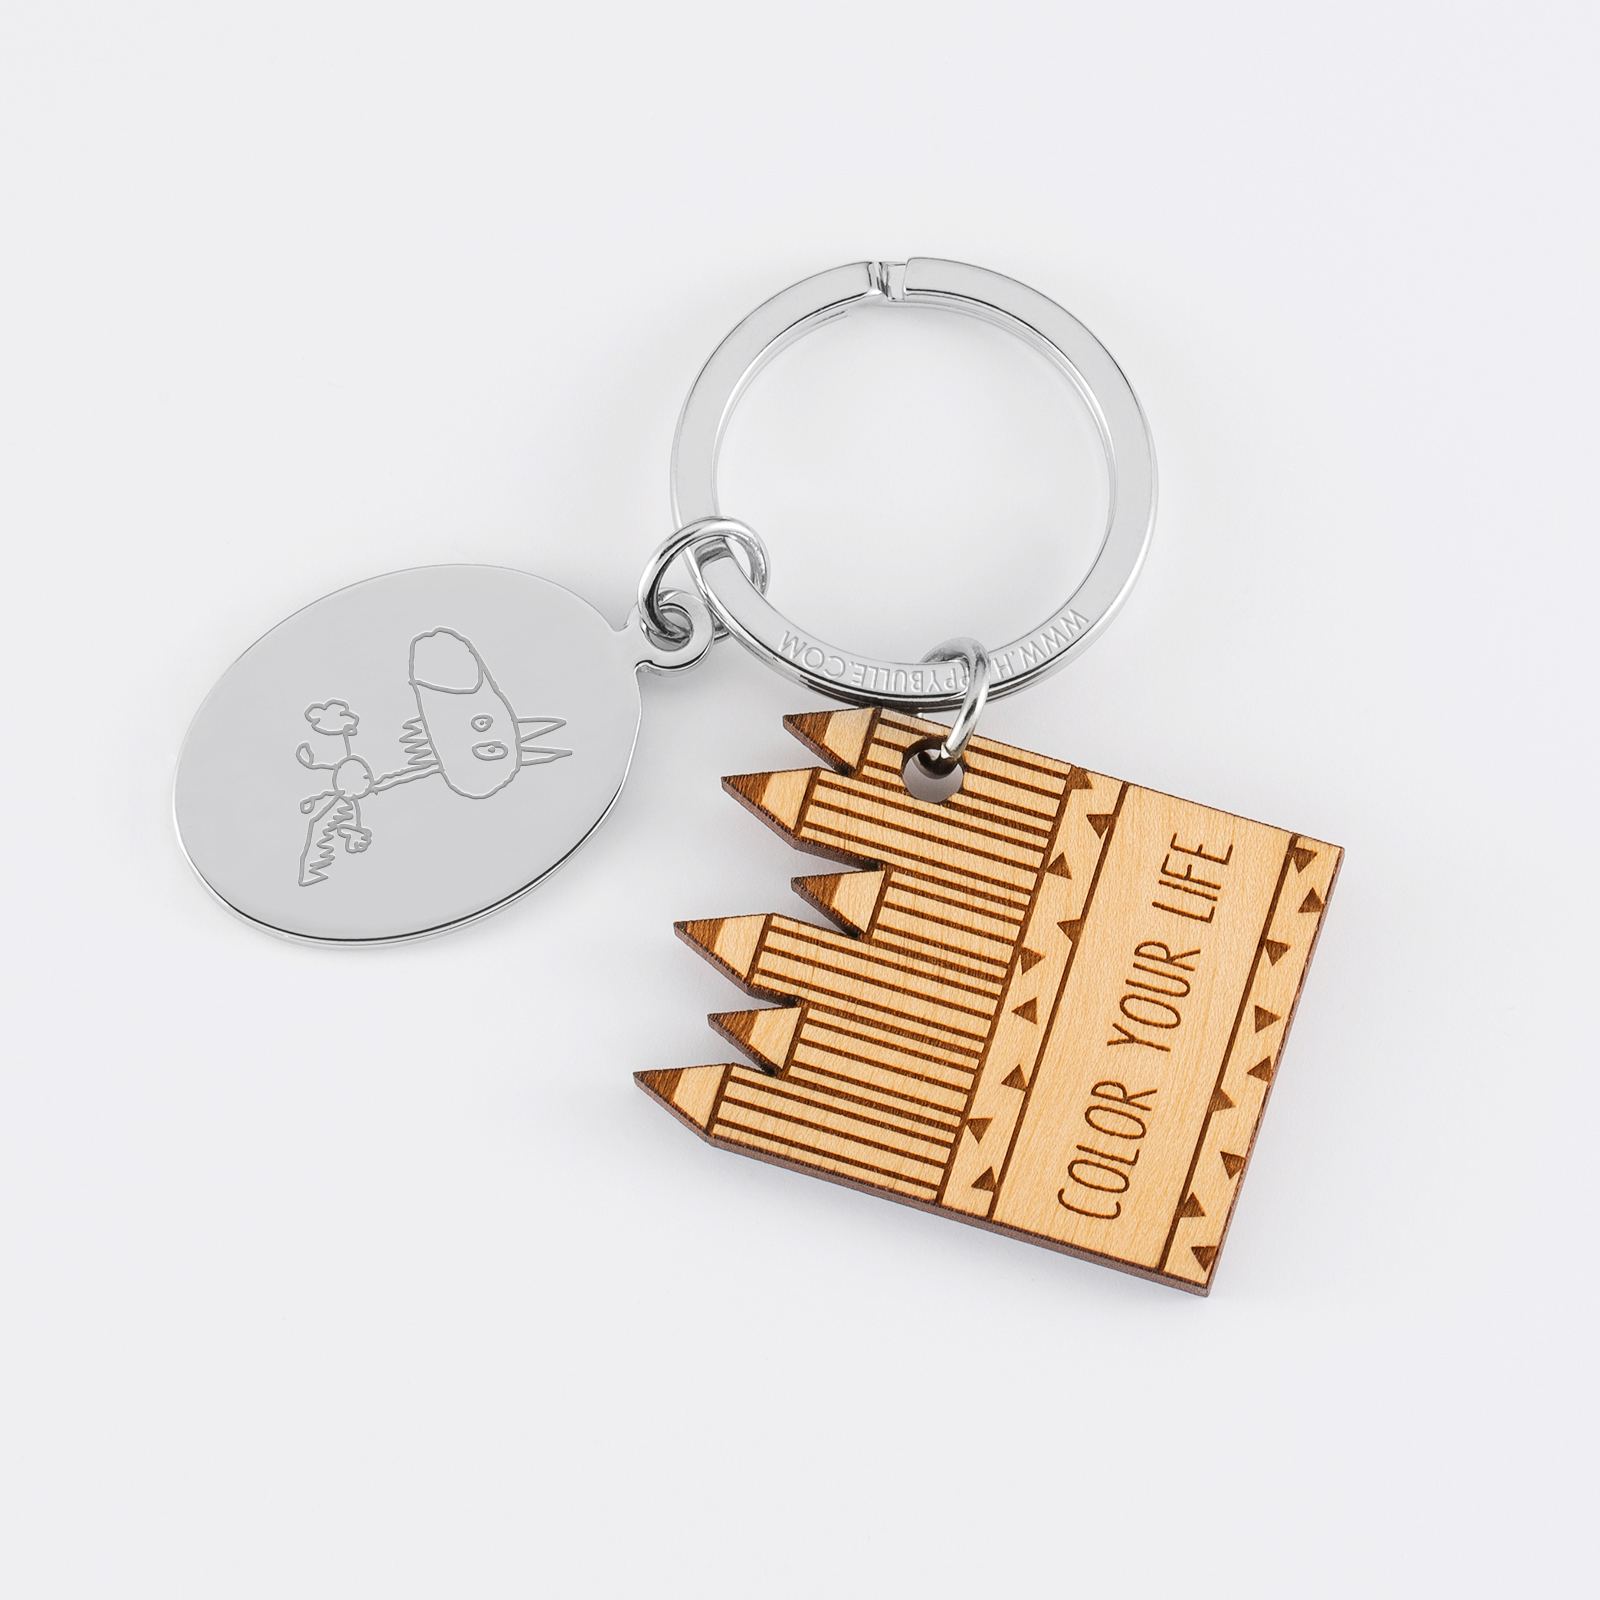 Personalised engraved oval steel medallion and wooden pencils charm keyring - sketch